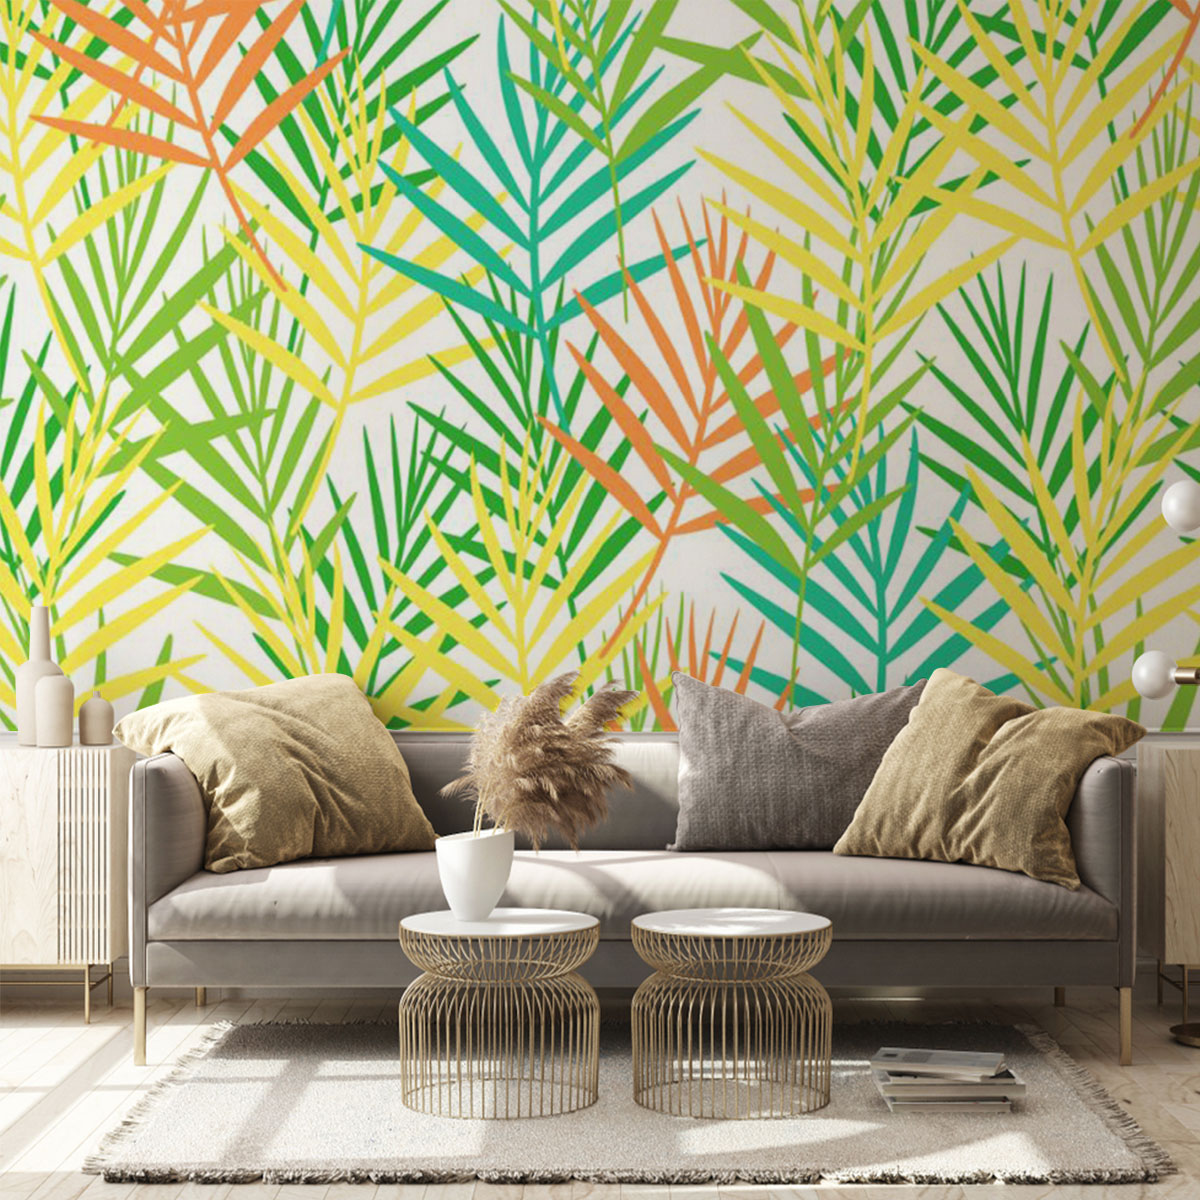 Colorful Withered Palm Fronds Wall Mural